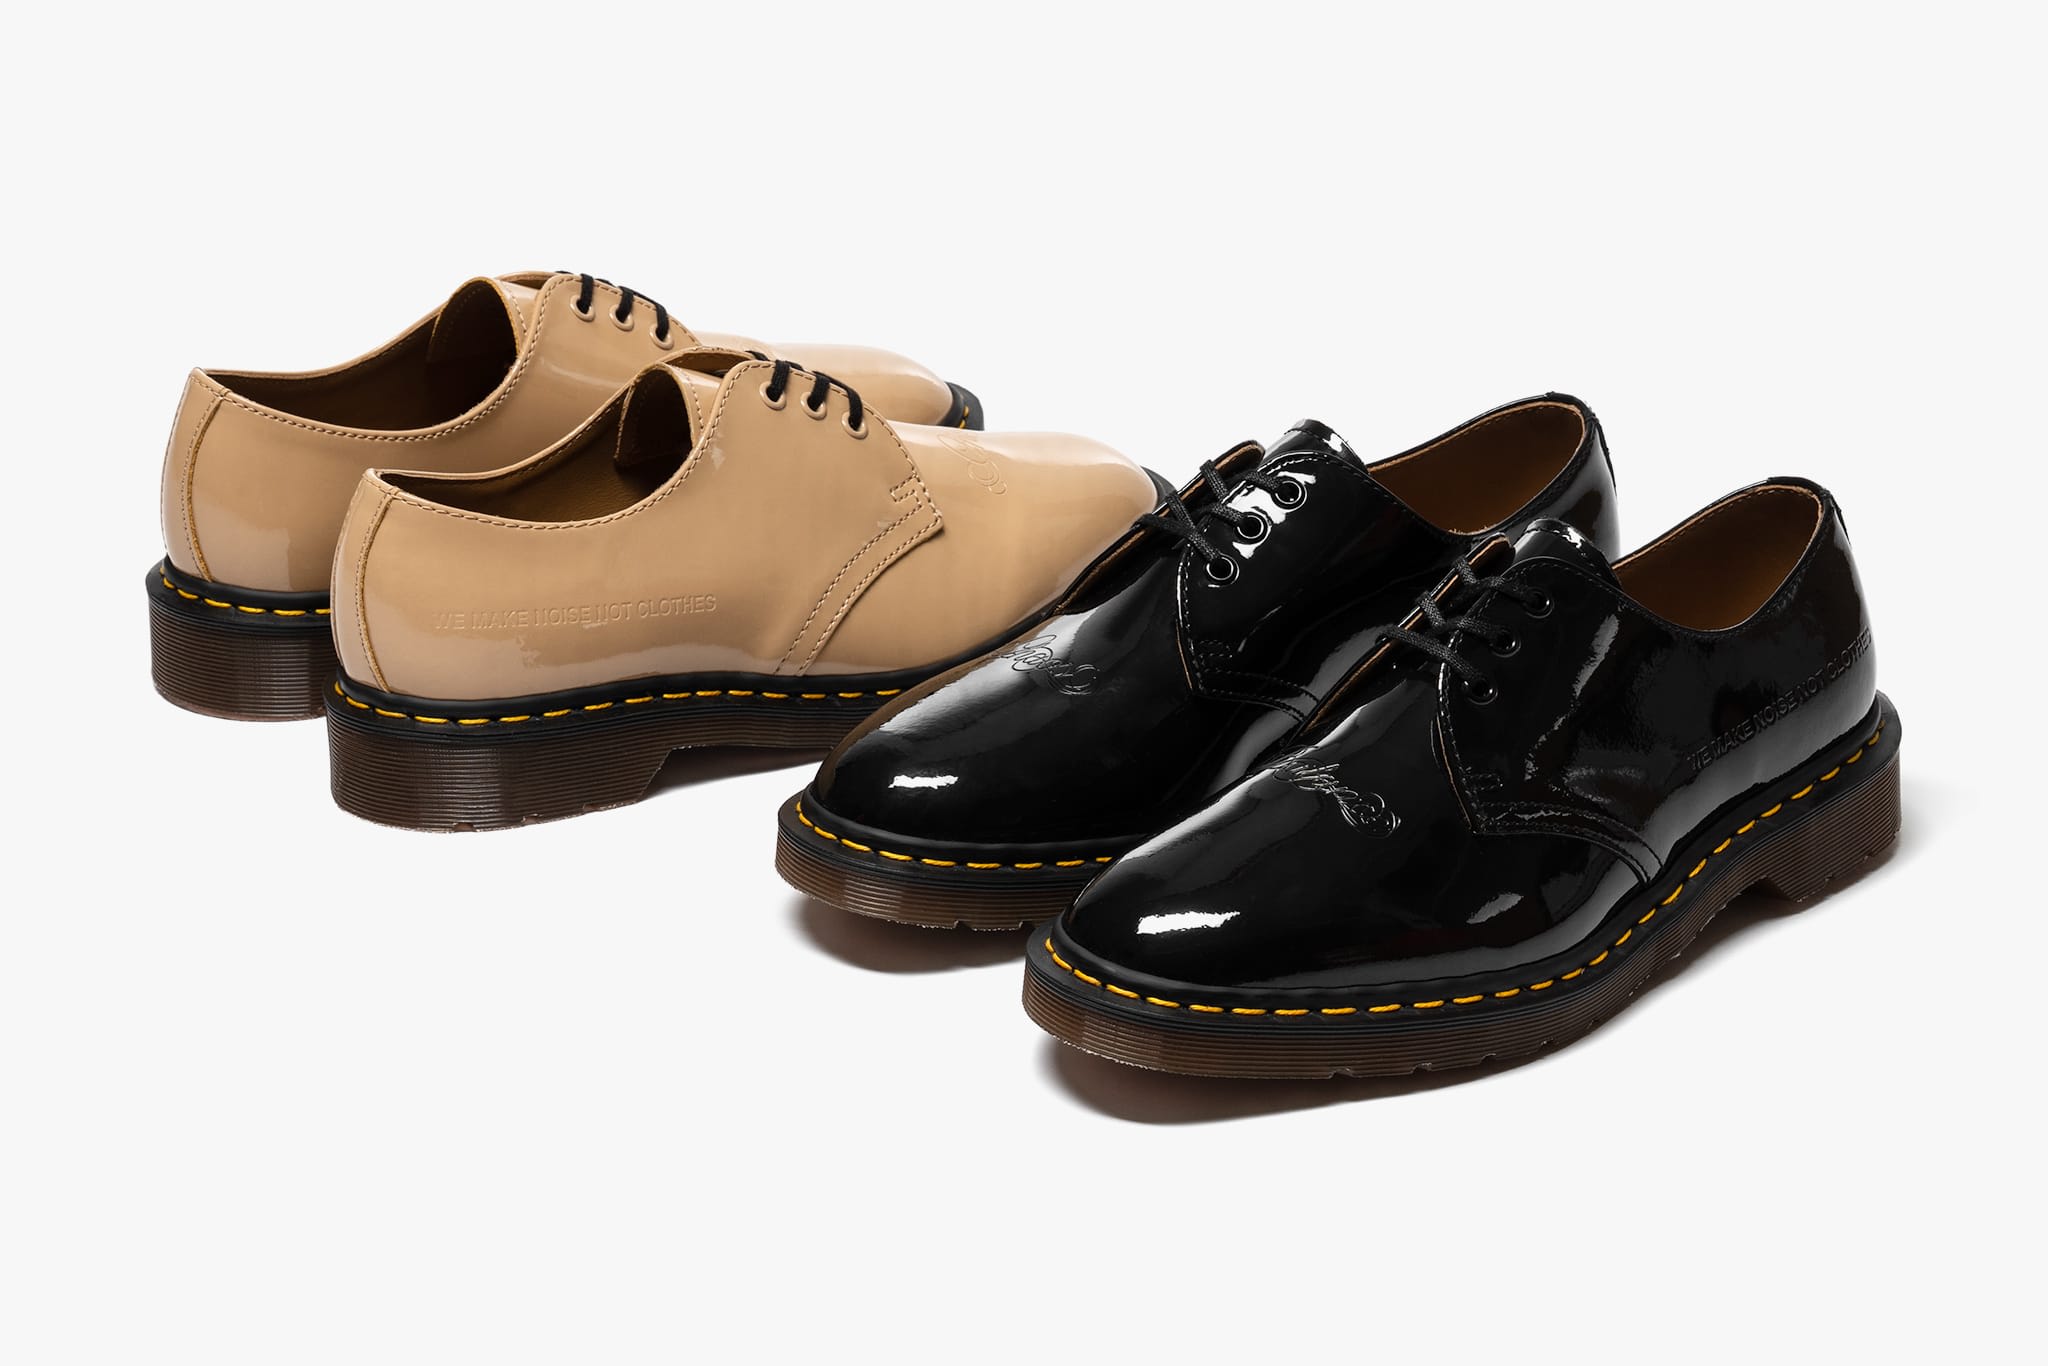 Dr. Martens x UNDERCOVER EMB Pack | Release Date: 10.26.19 | HAVEN